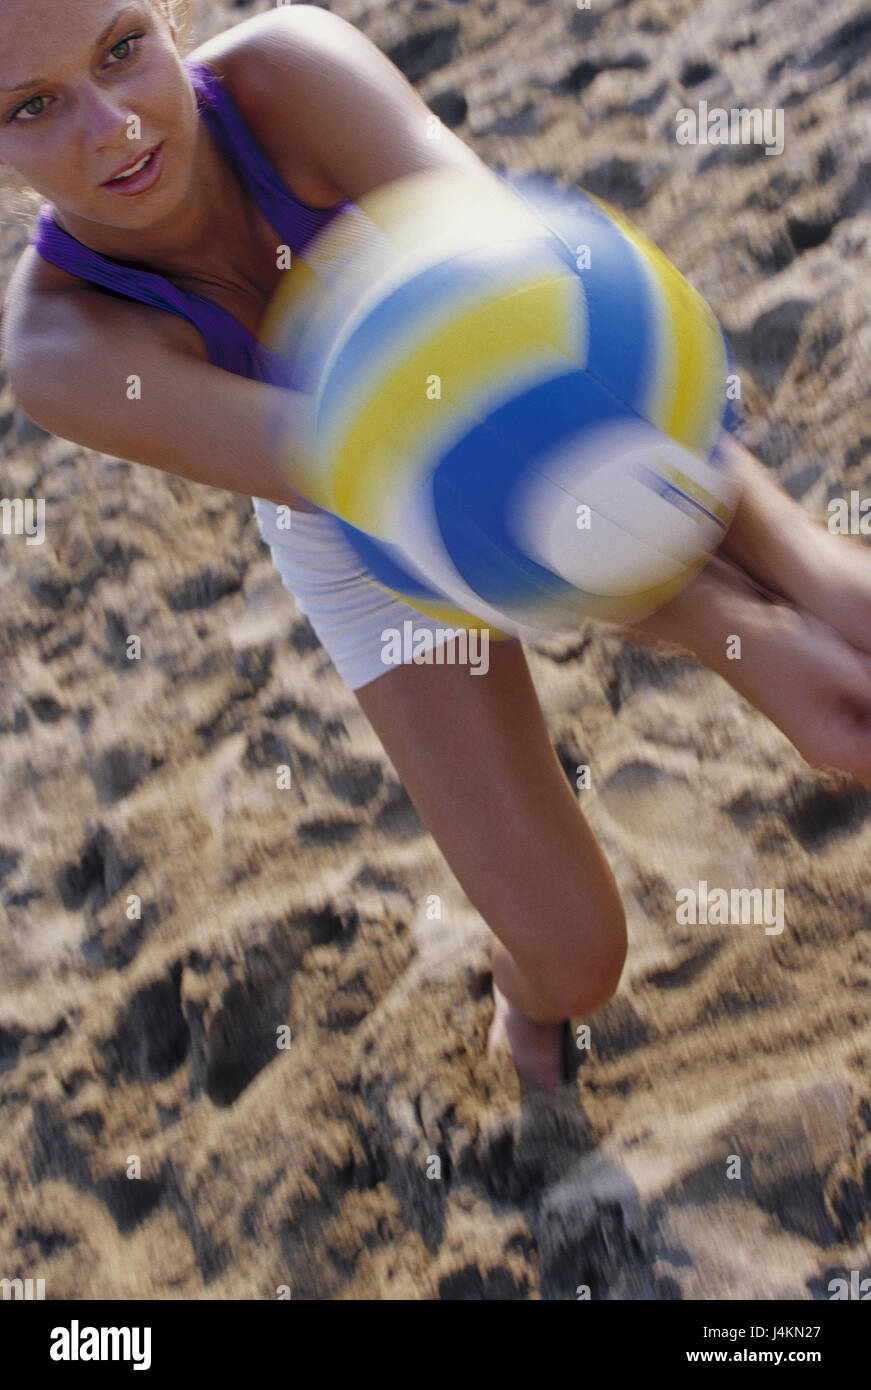 Beach, woman, volleyball, ball, accept, blur sandy beach, summer, vacation, leisure time, lifestyle, young, sport, sportily, actively, activity, game, volleyball, Beachvolleyball, fitness, fit, motion, excavate Stock Photo